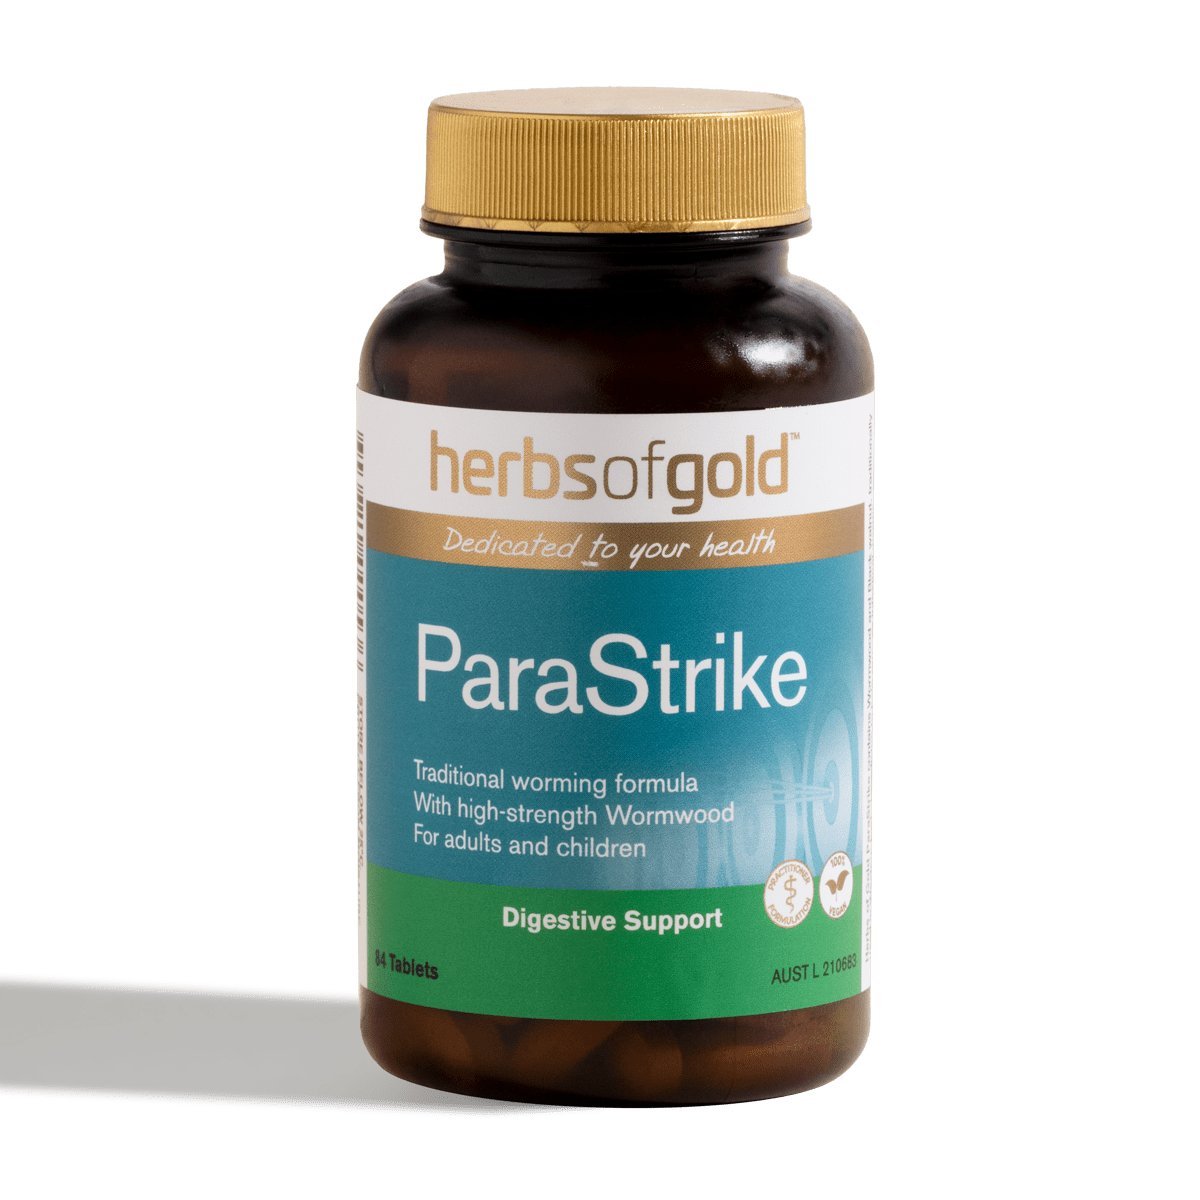 Herbs of Gold ParaStrike - Dr Earth - Supplements, Liver & Digestion